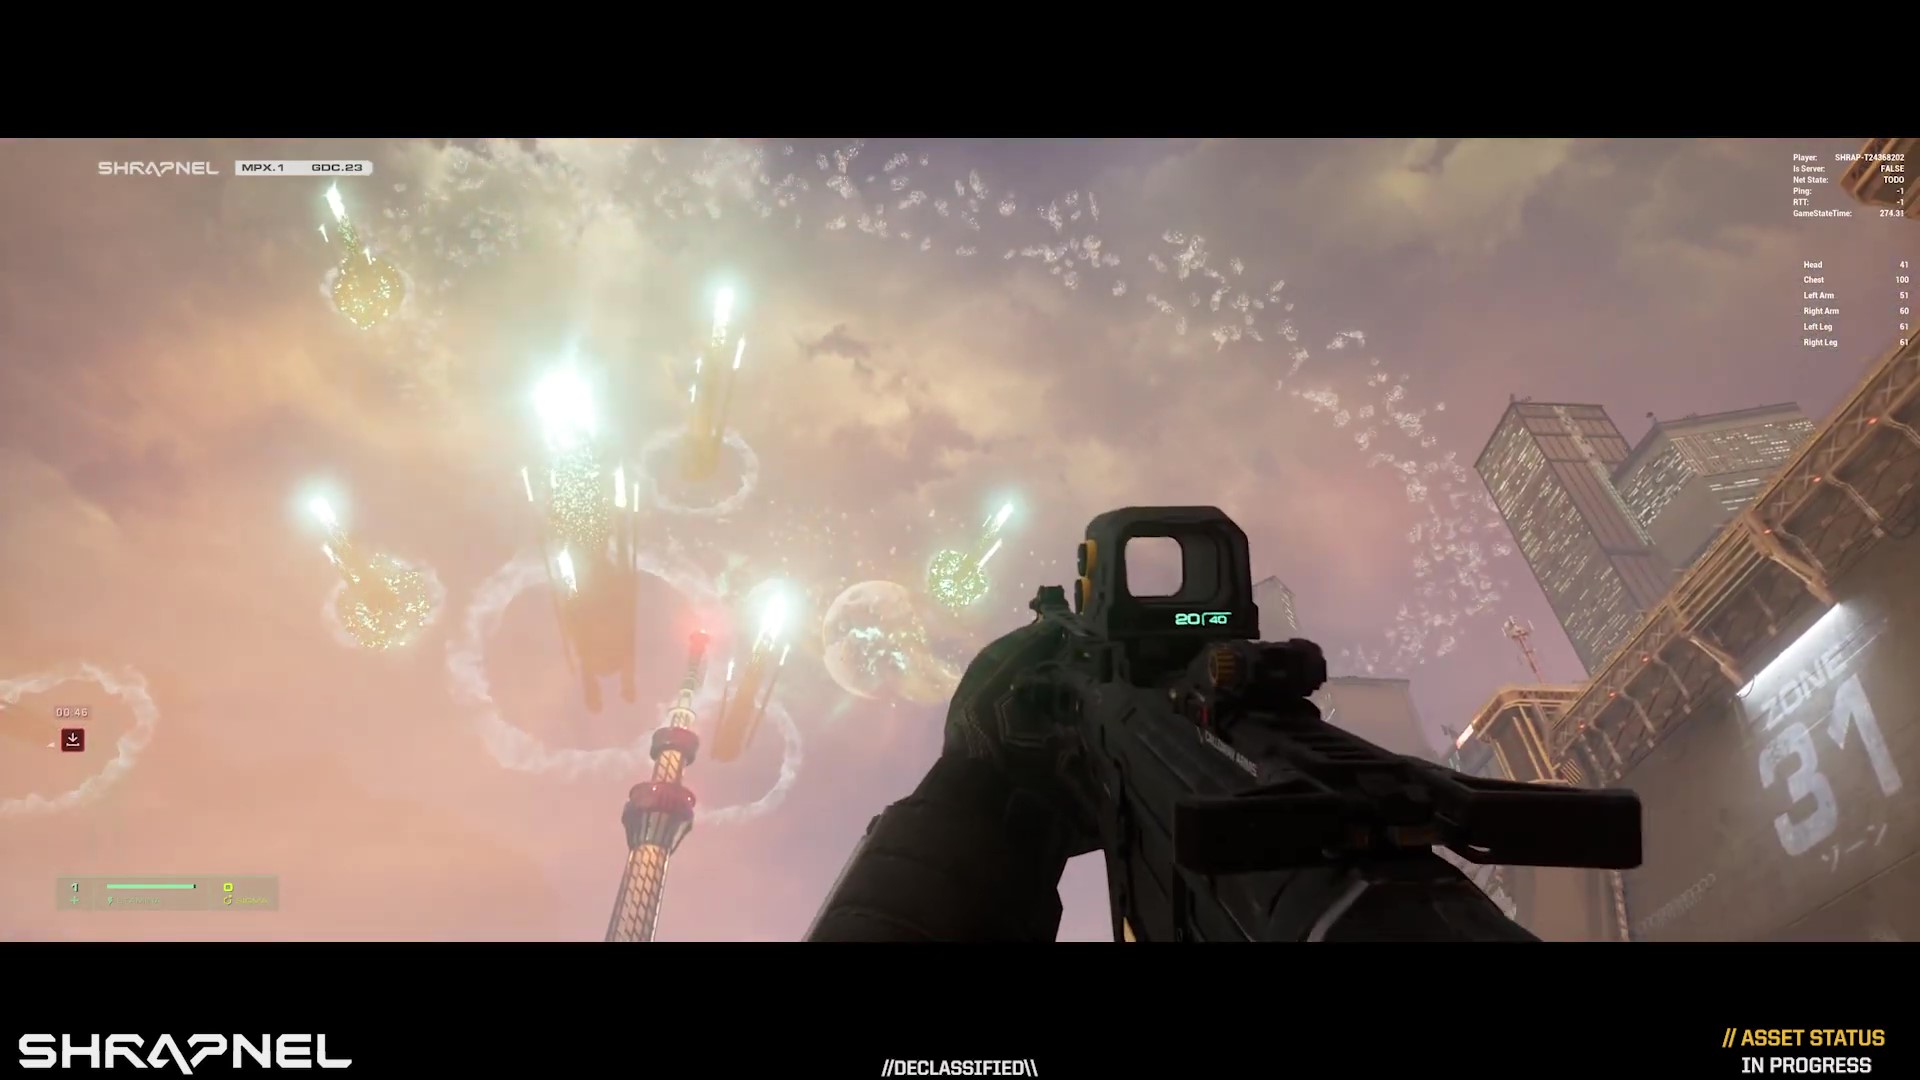 In the game, players are seen scanning the sky, searching for multiple objects that they need to identify, adding a thrilling experience to the gameplay.